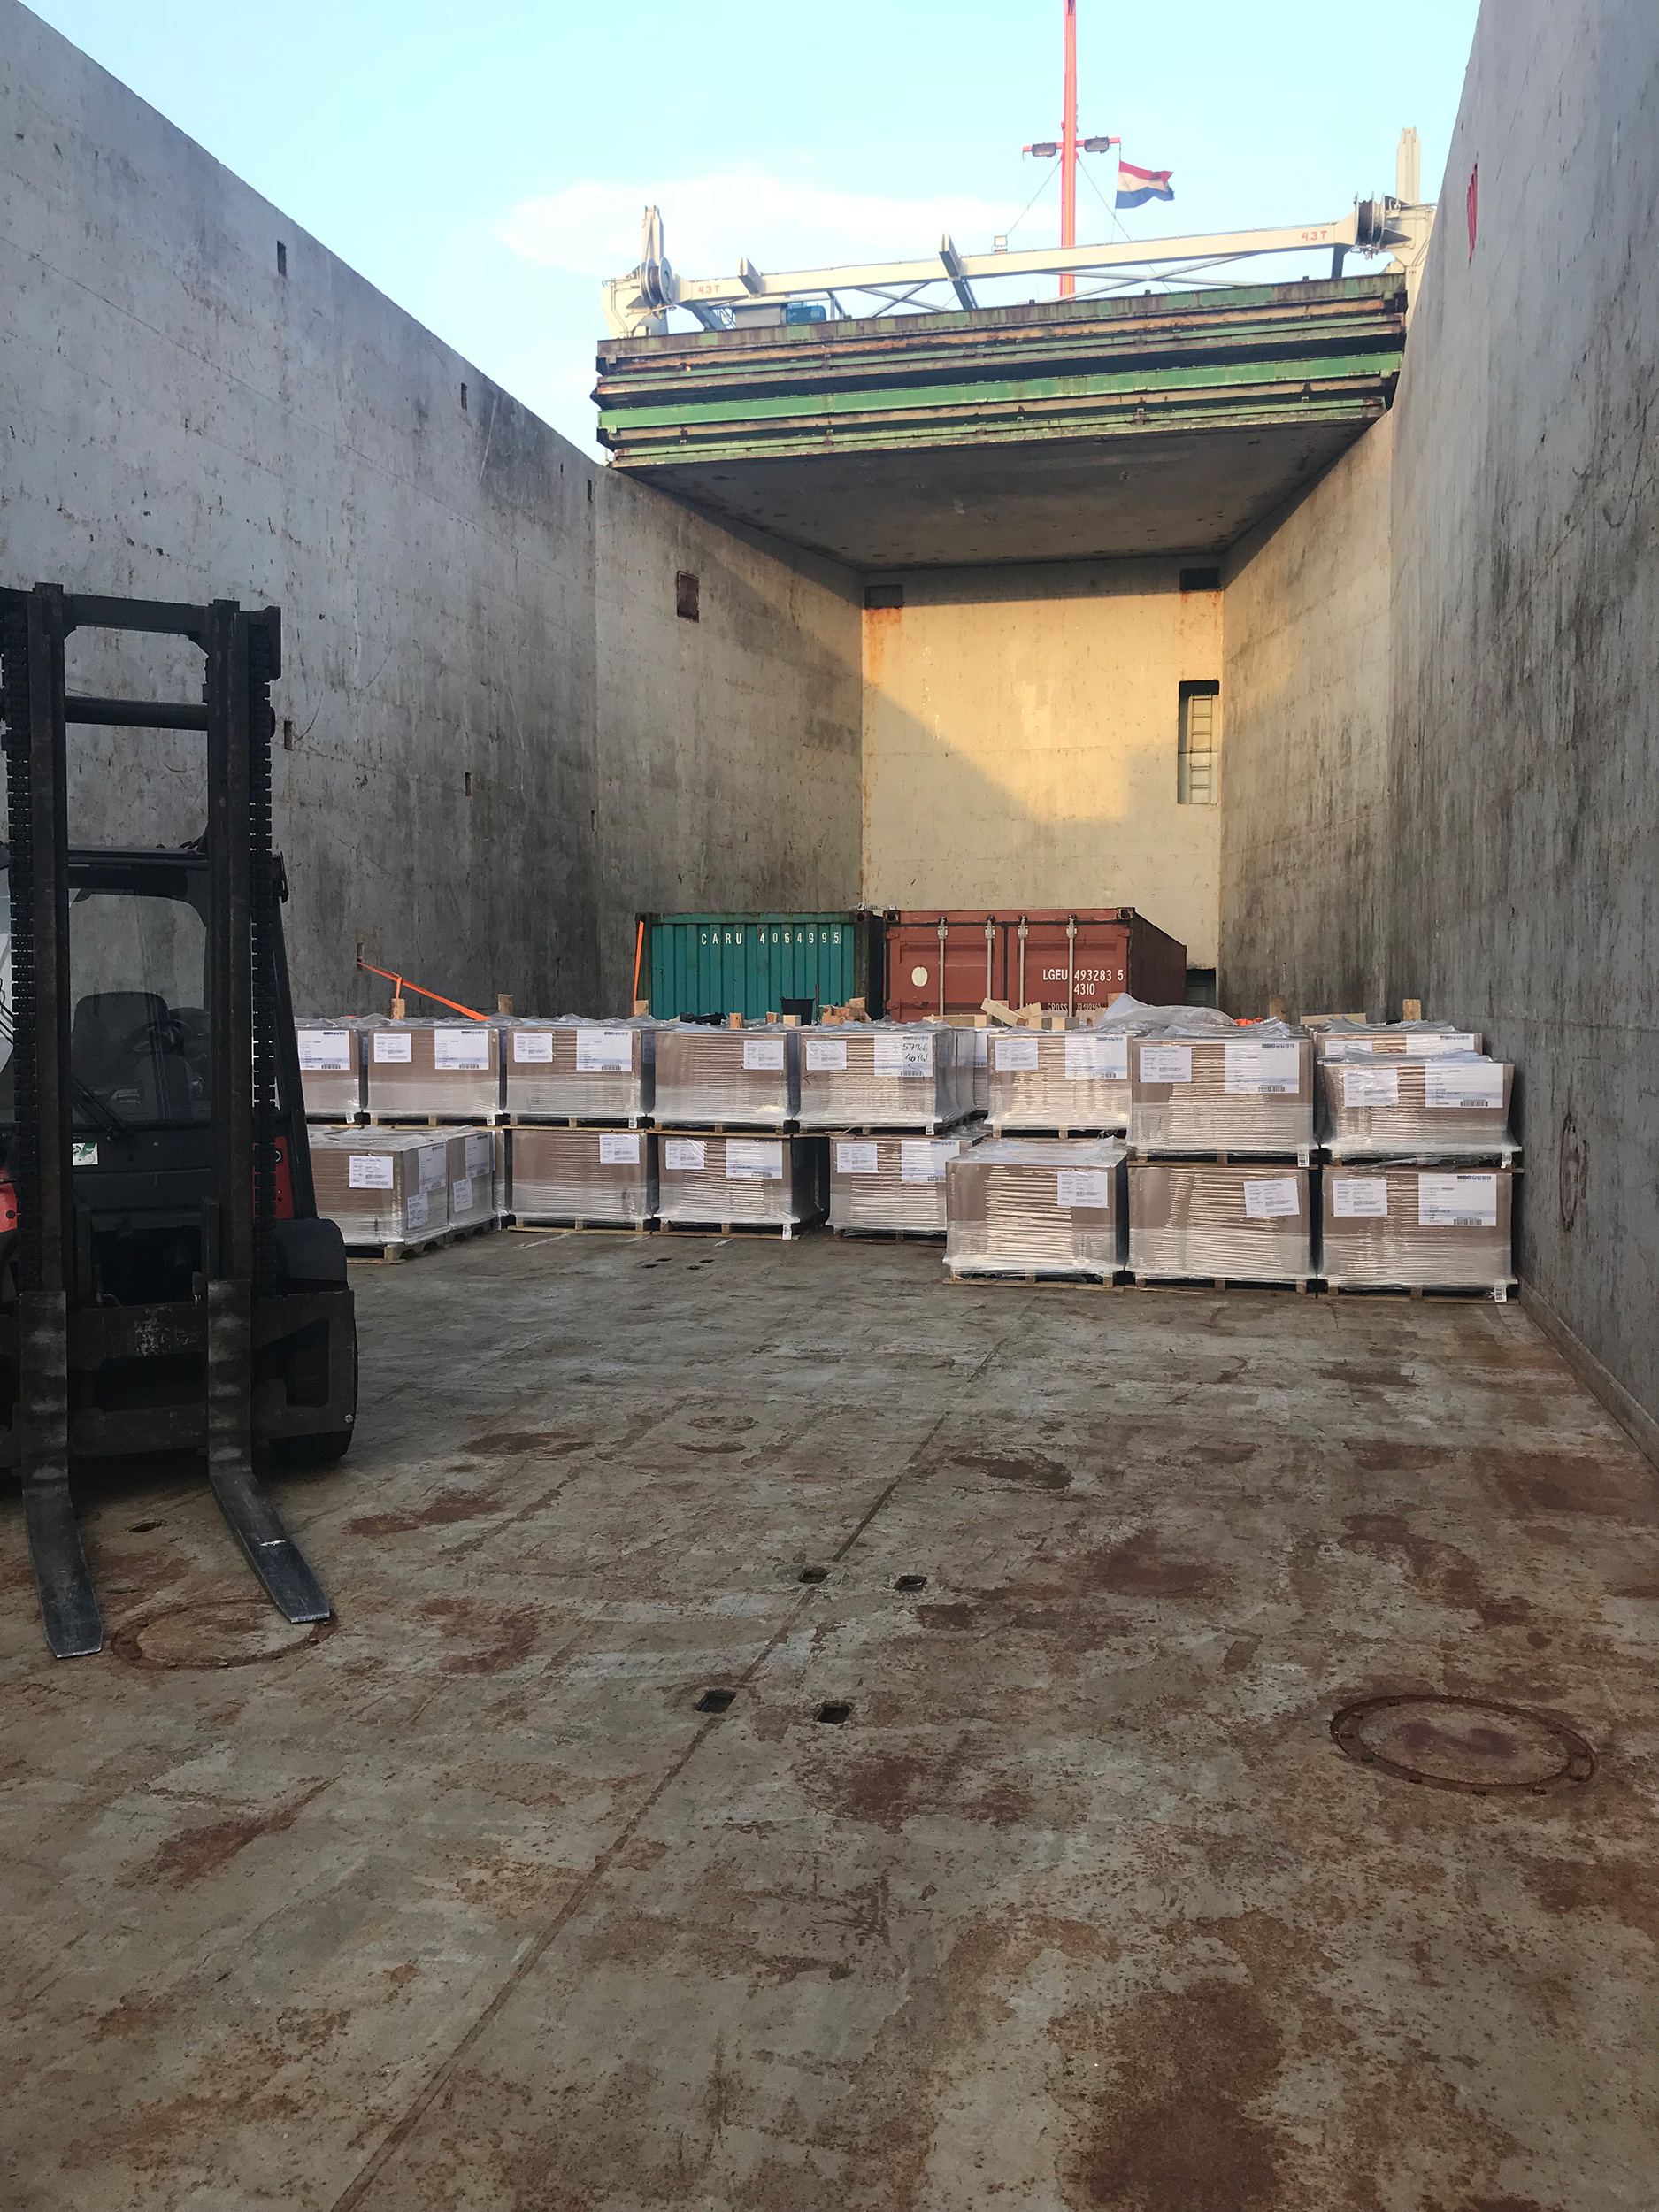 Shipment of refractory materials